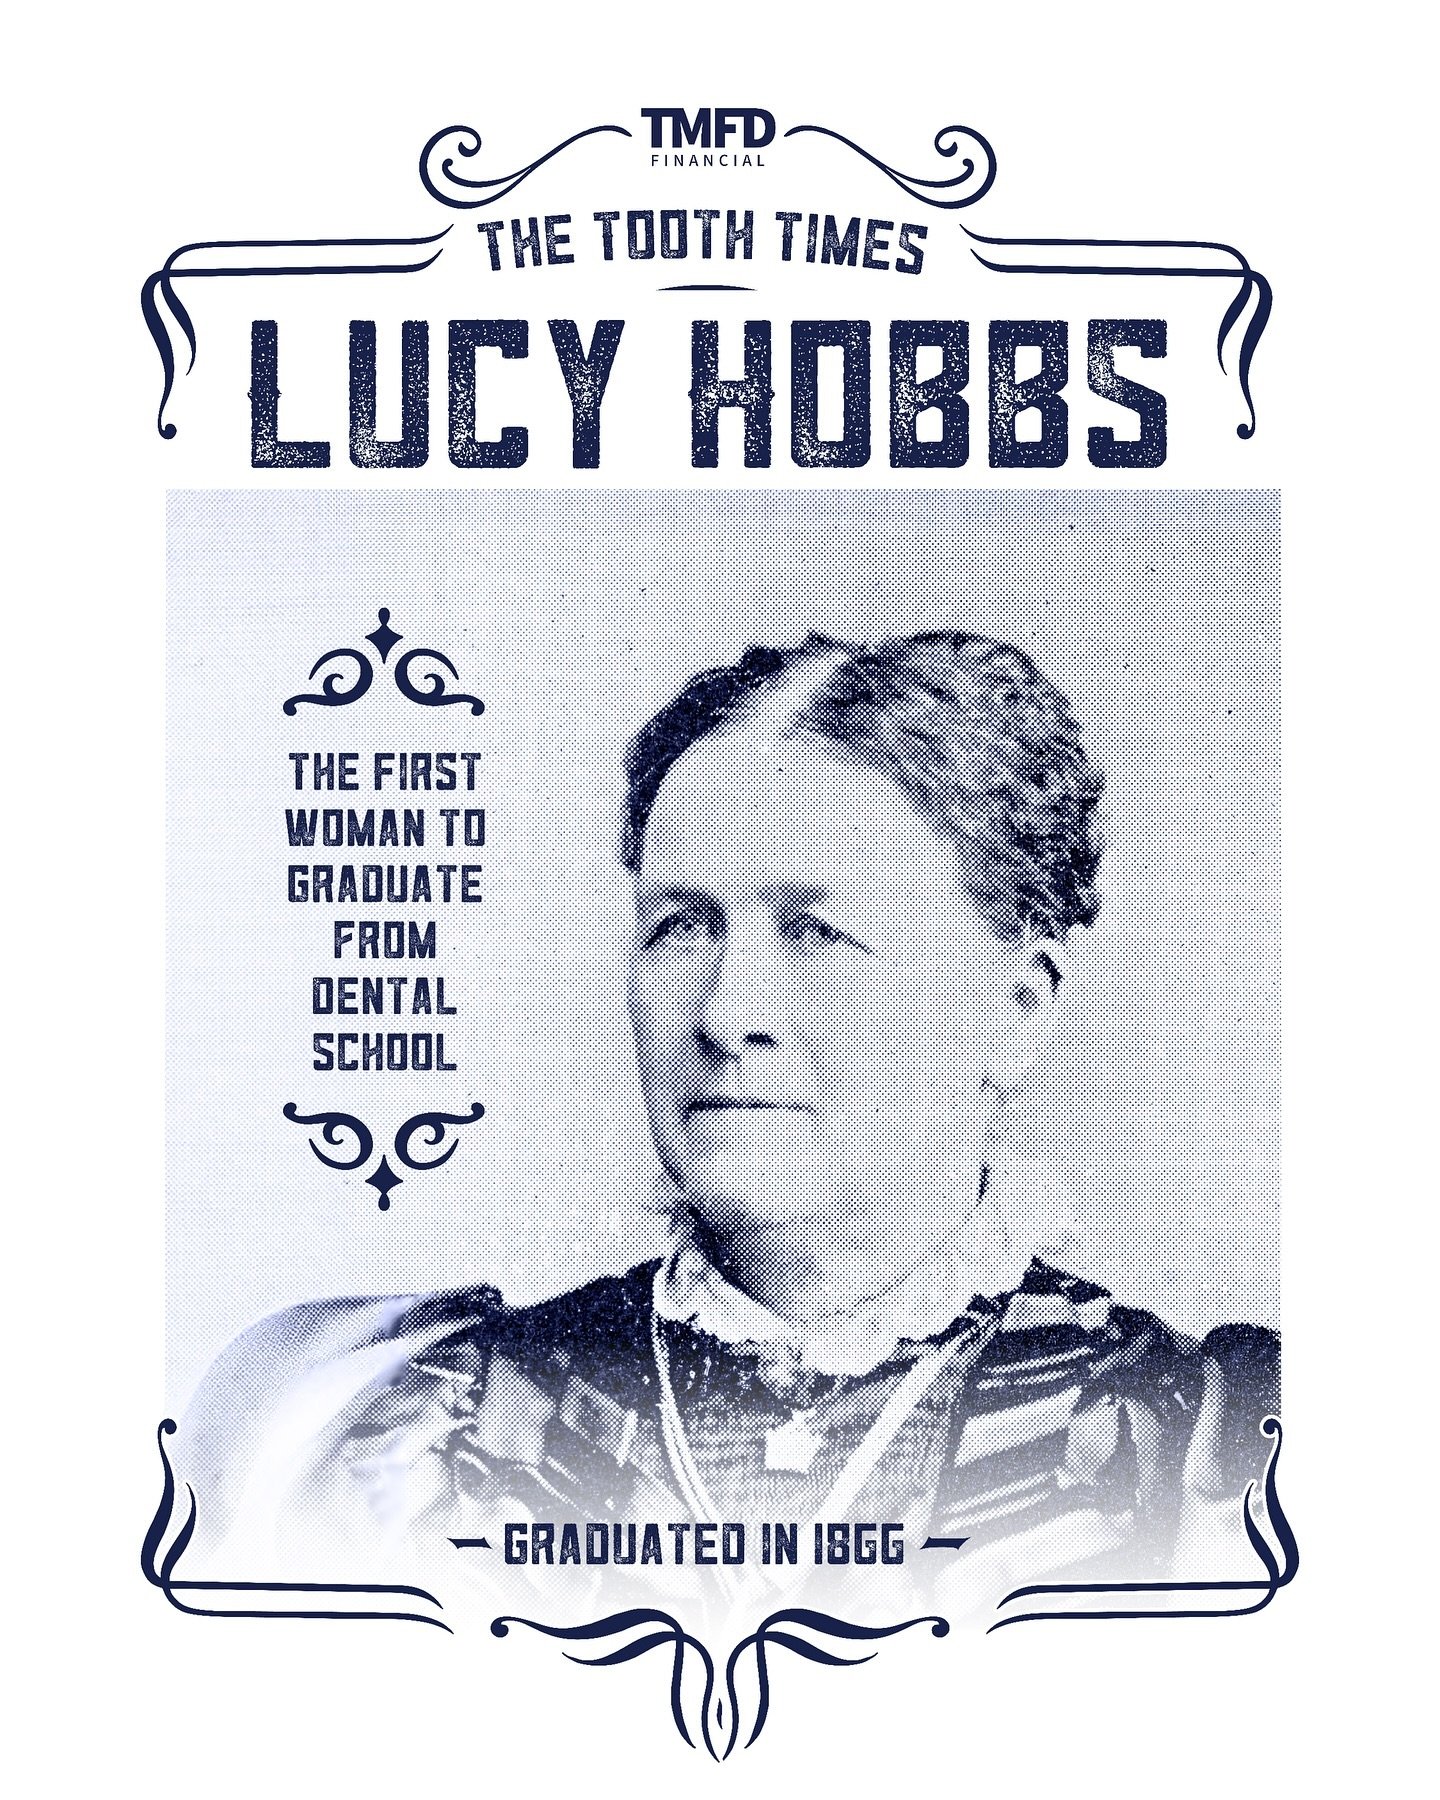 The year was 1866, and a woman by the name of Lucy Hobbs Taylor achieved something no other woman had before. Against all odds, she became the first American woman to earn a degree in dentistry from the Ohio College of Dental Surgery. 

Lucy&rsquo;s 